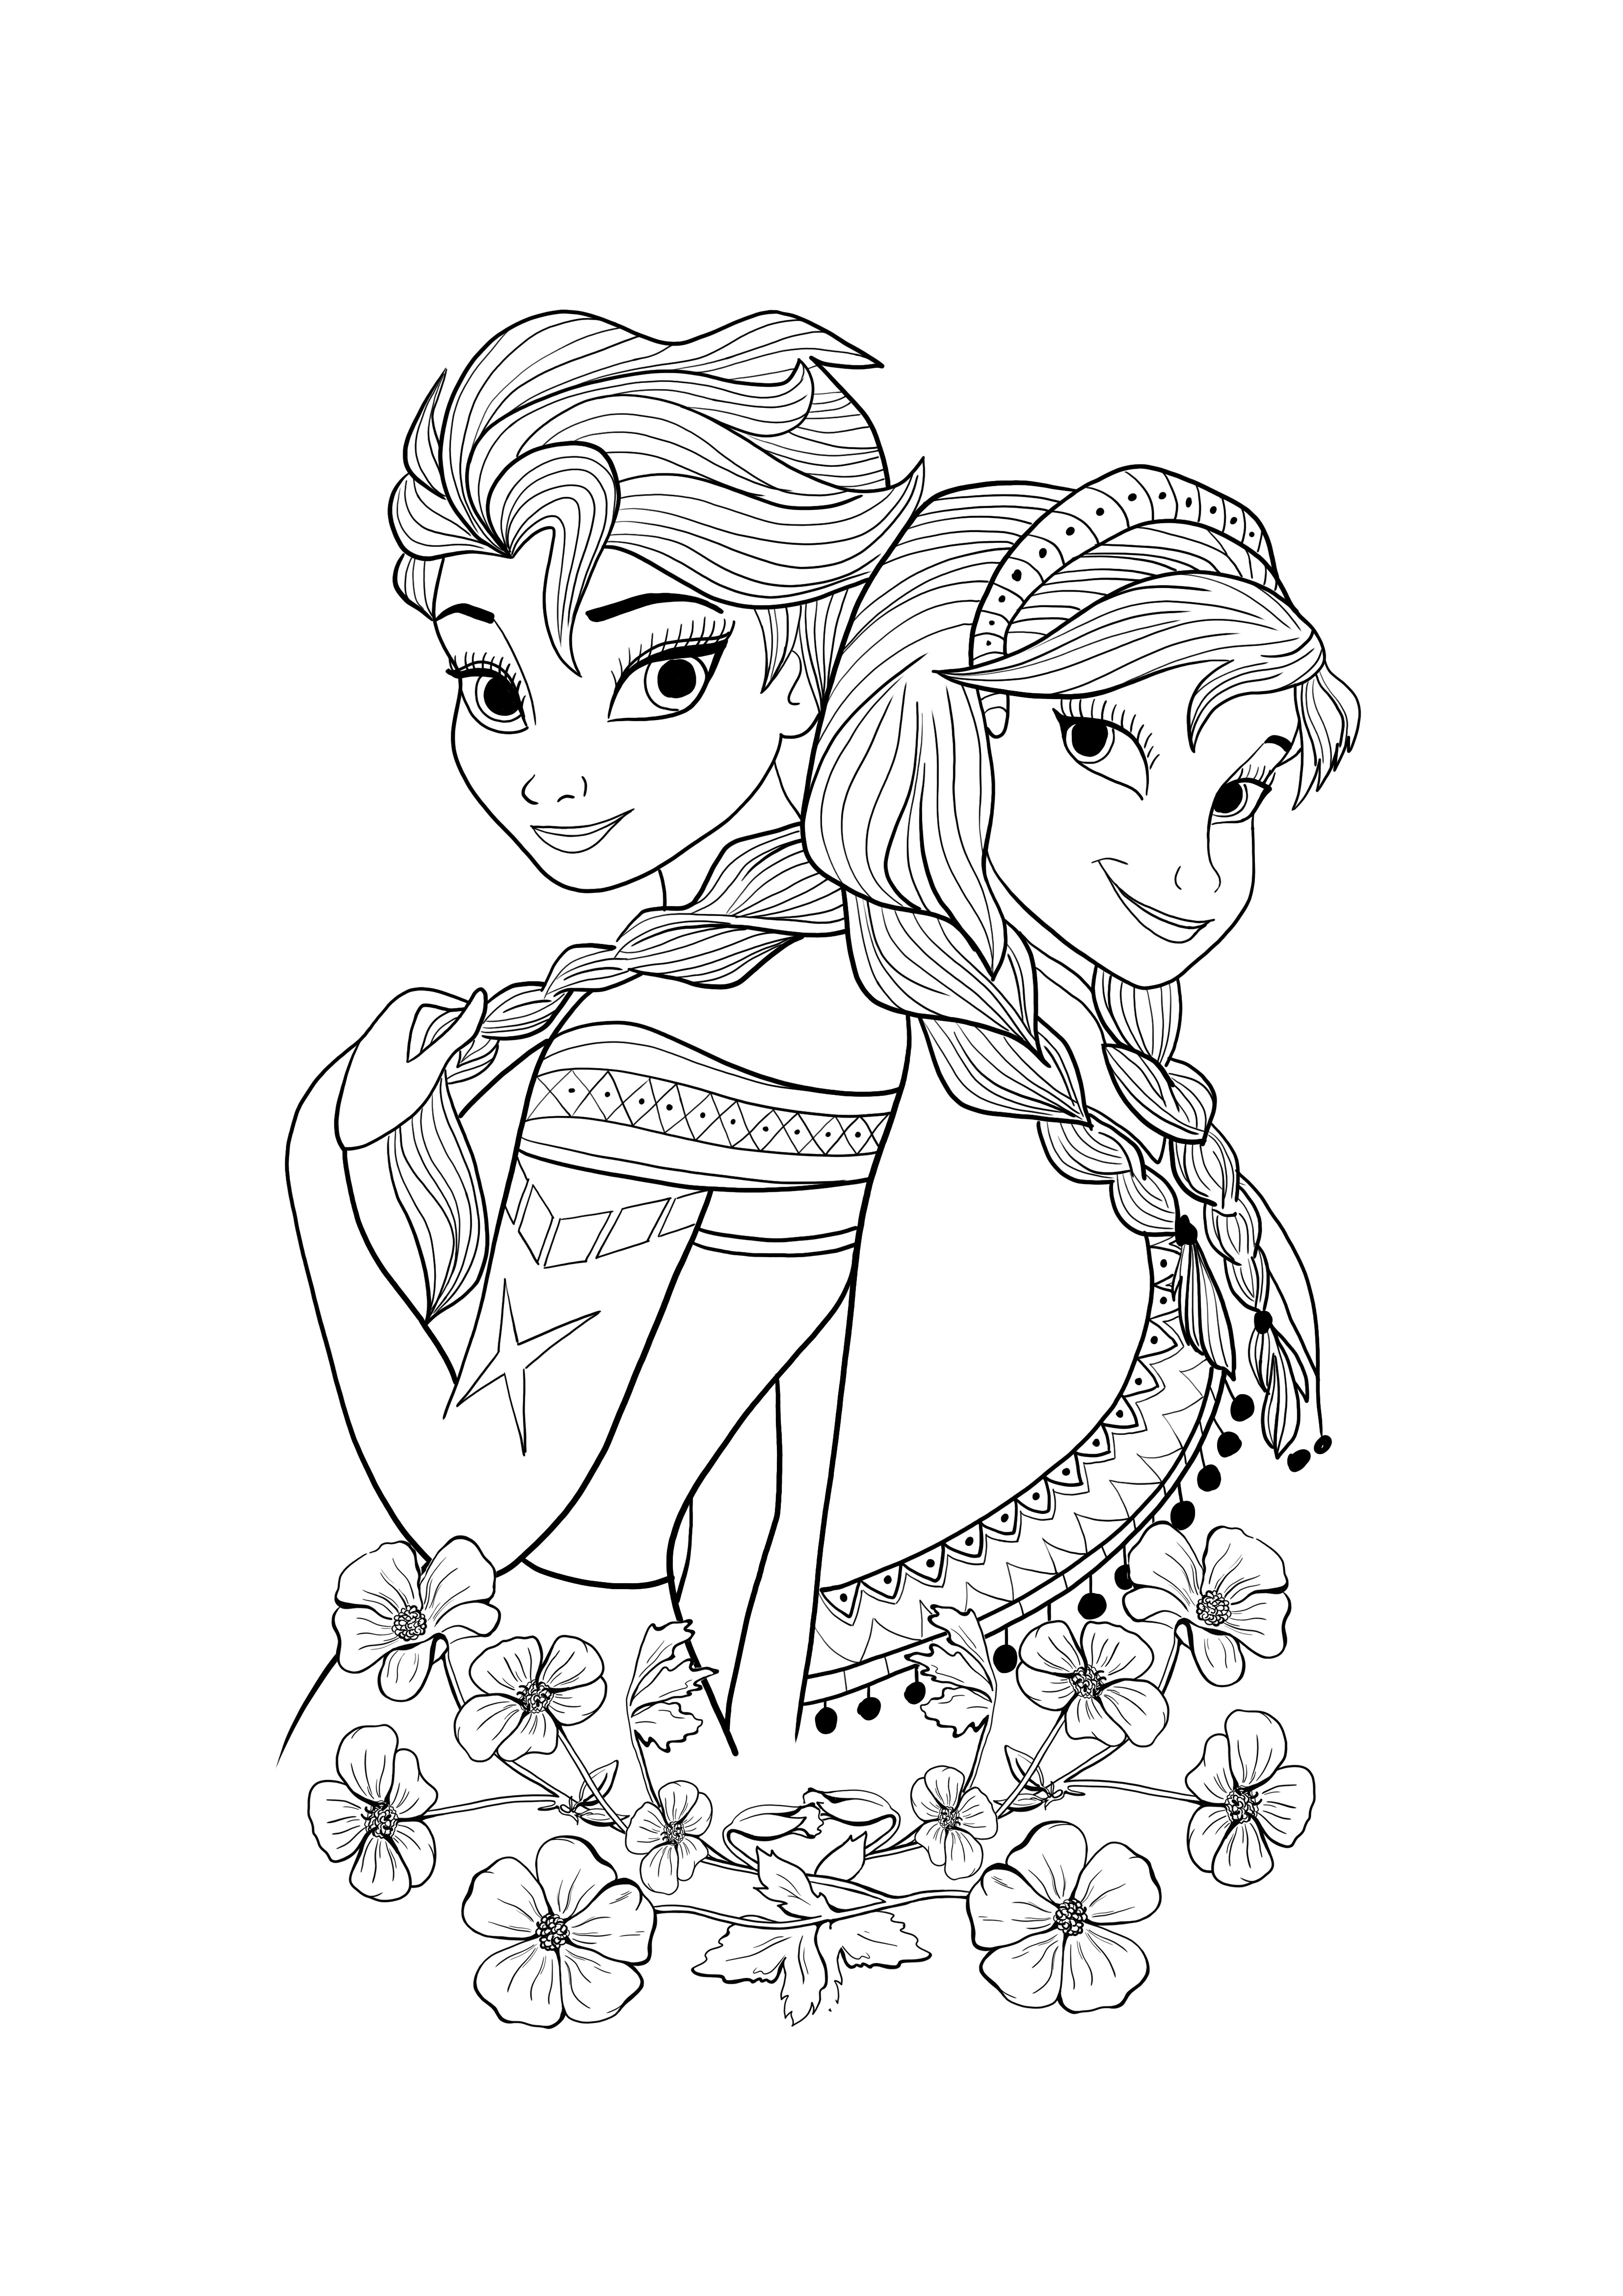 Elsa and Ana to download and color for free